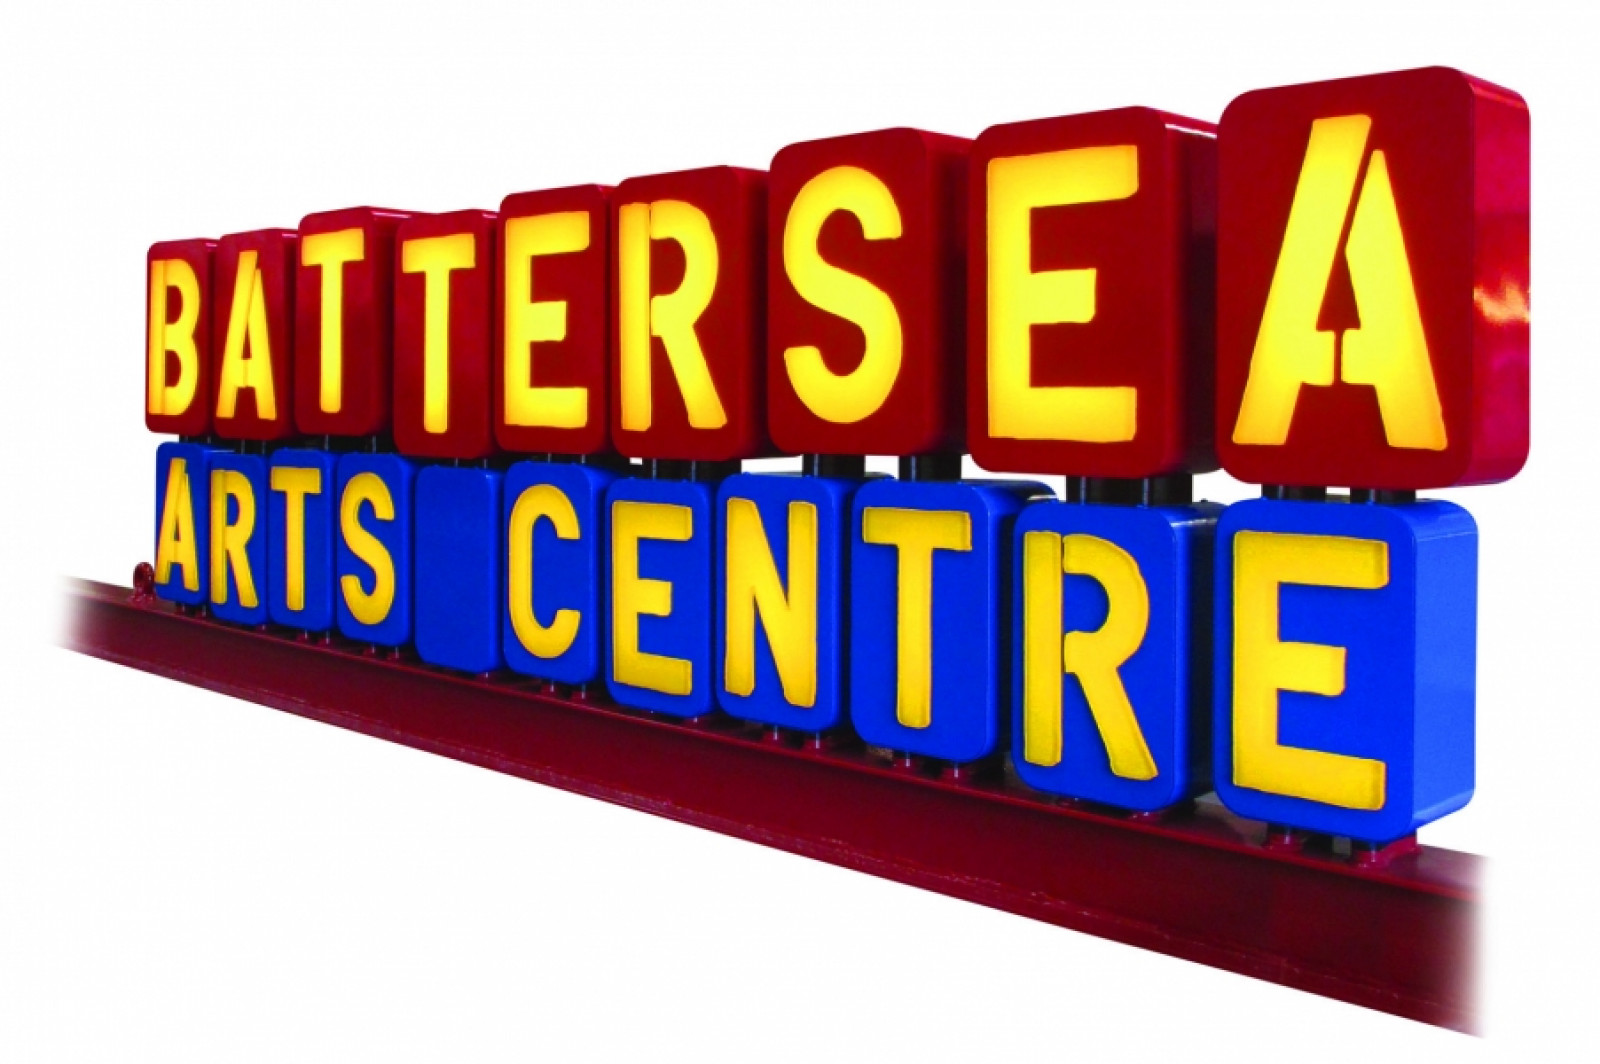 New Battersea Arts Centre signage produced by CMA...